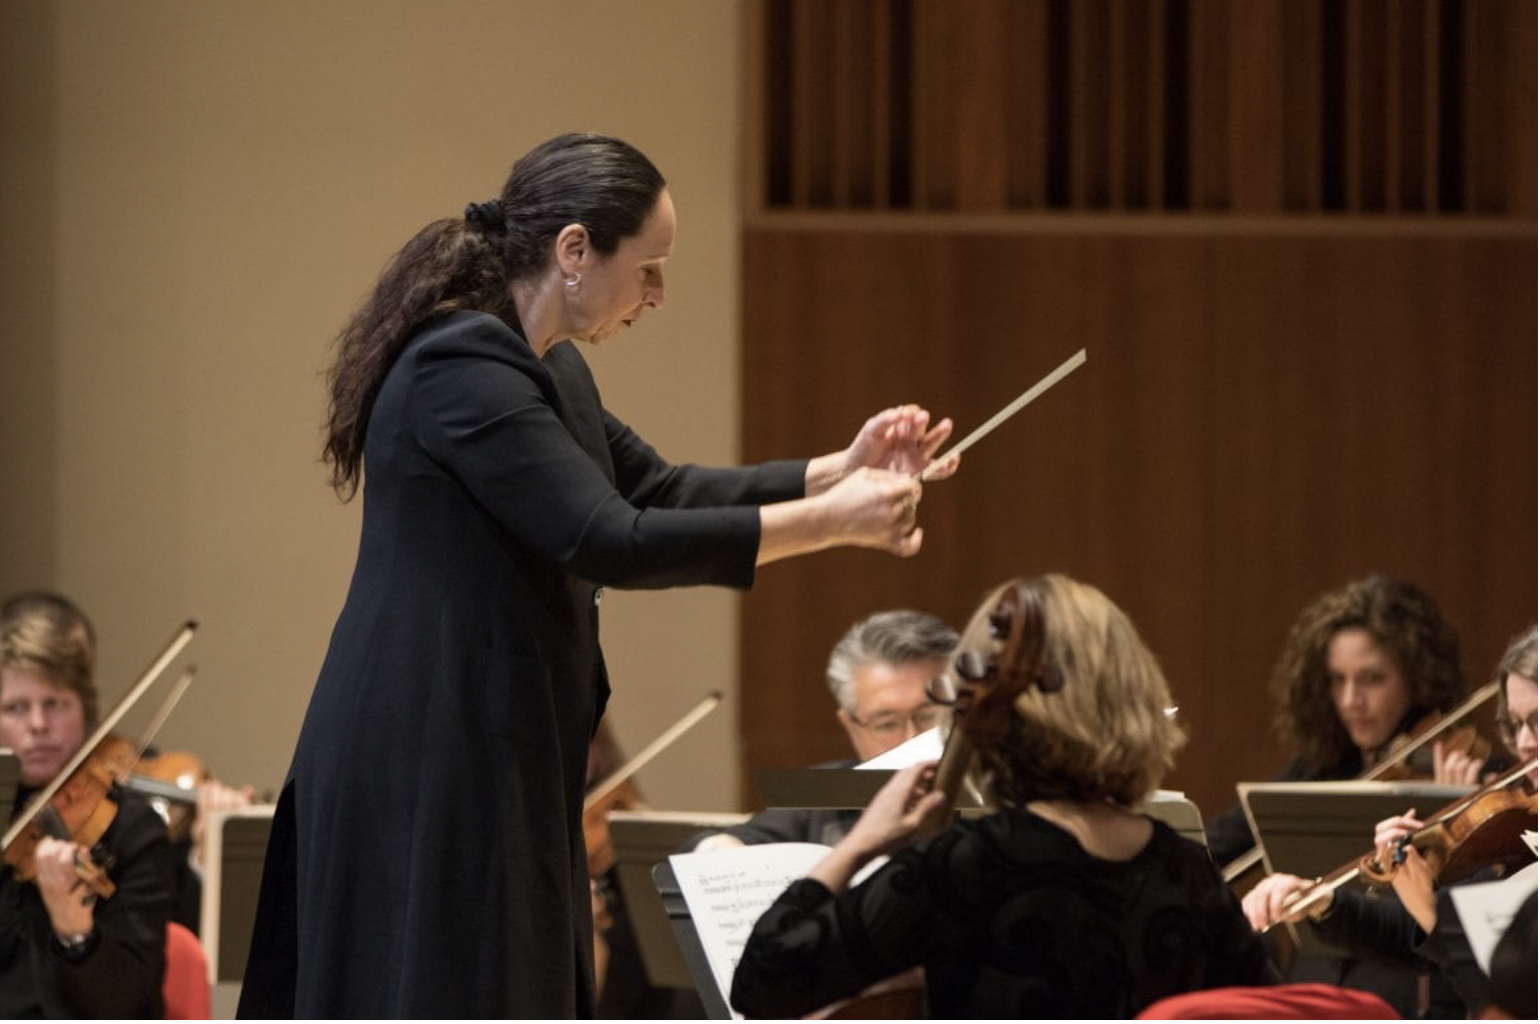 Female conductor conducts chamber orchestra